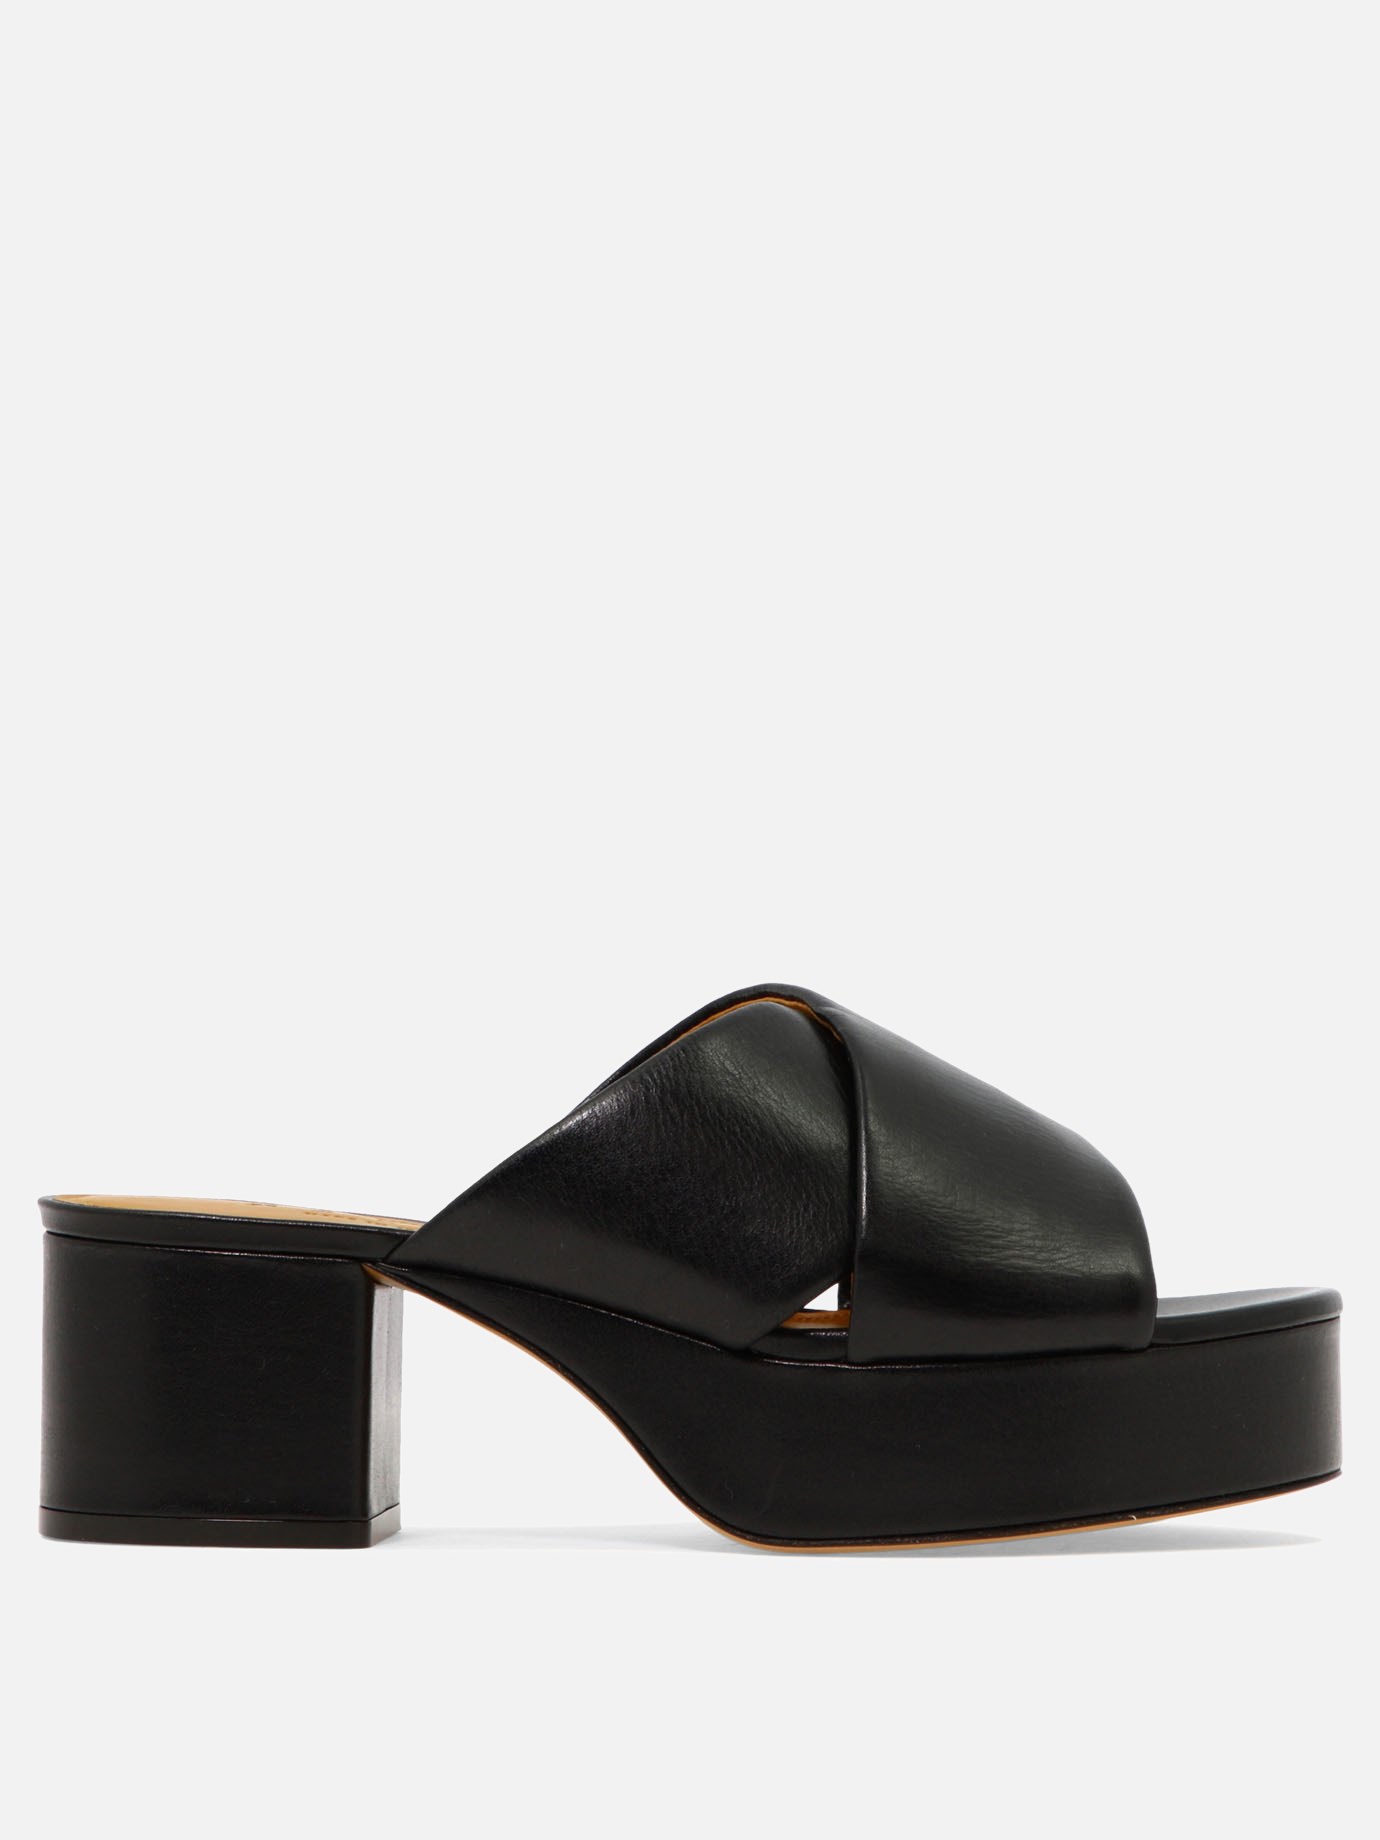  Cross  sandals by Marni